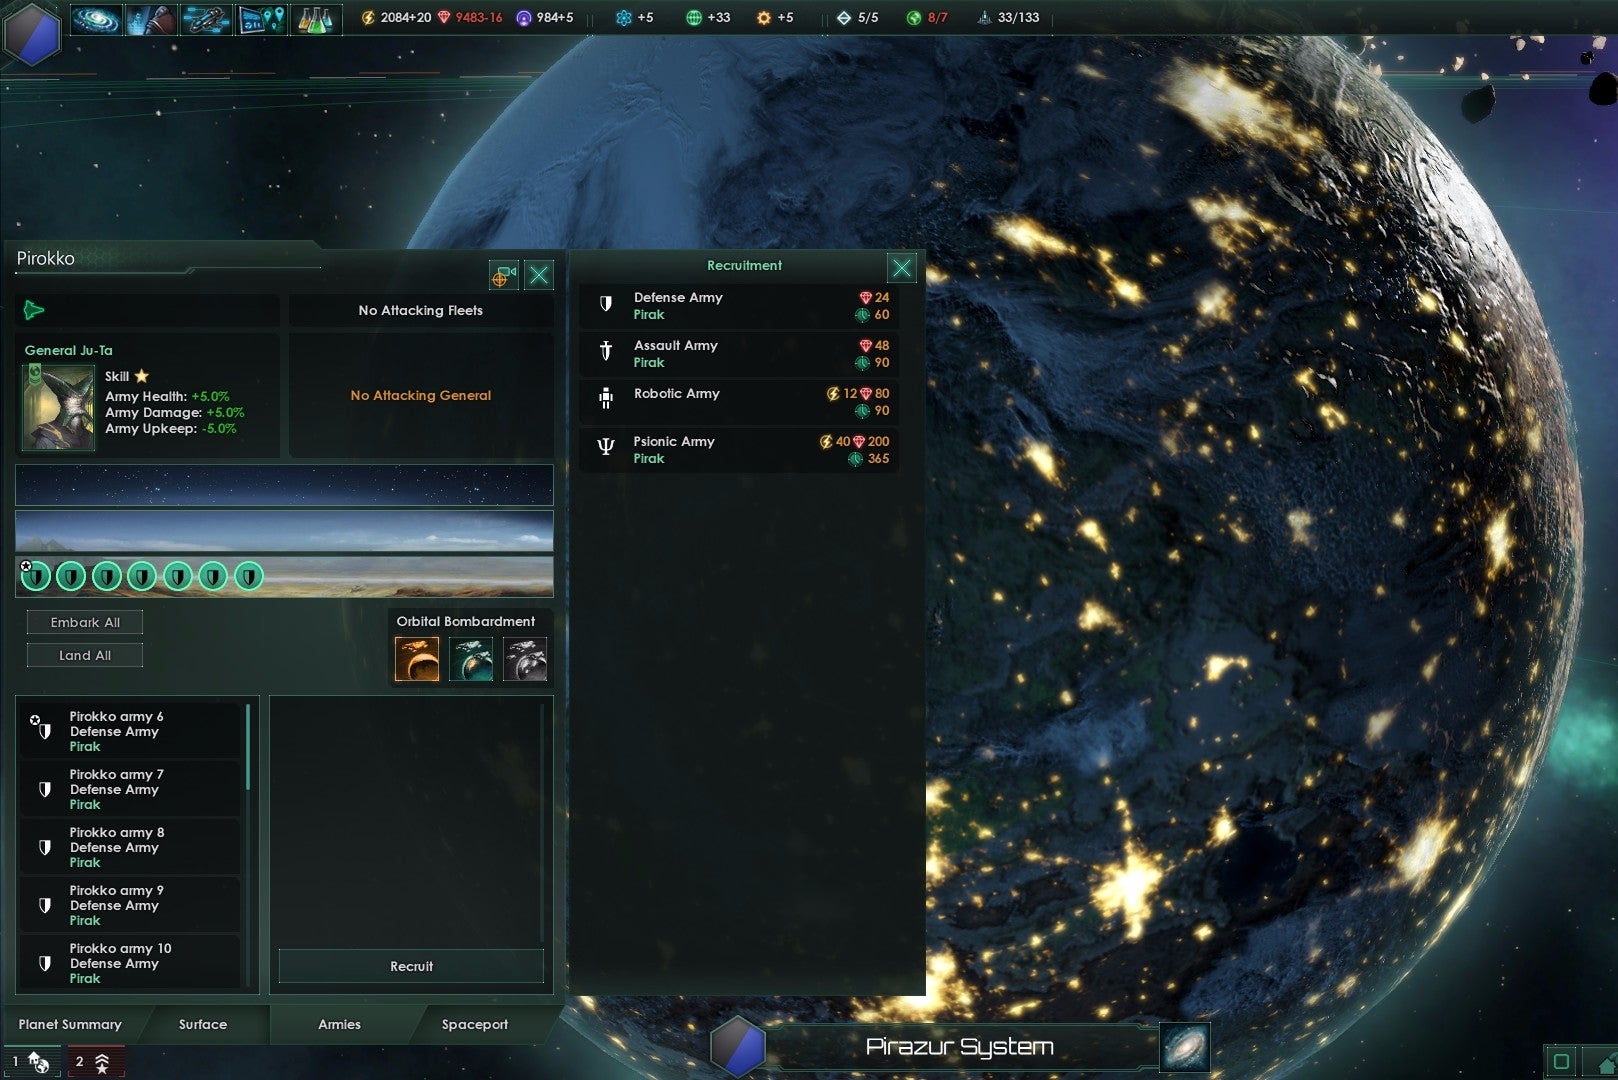 Paradox offers free game or two DLCs after price hike kerfuffle |  